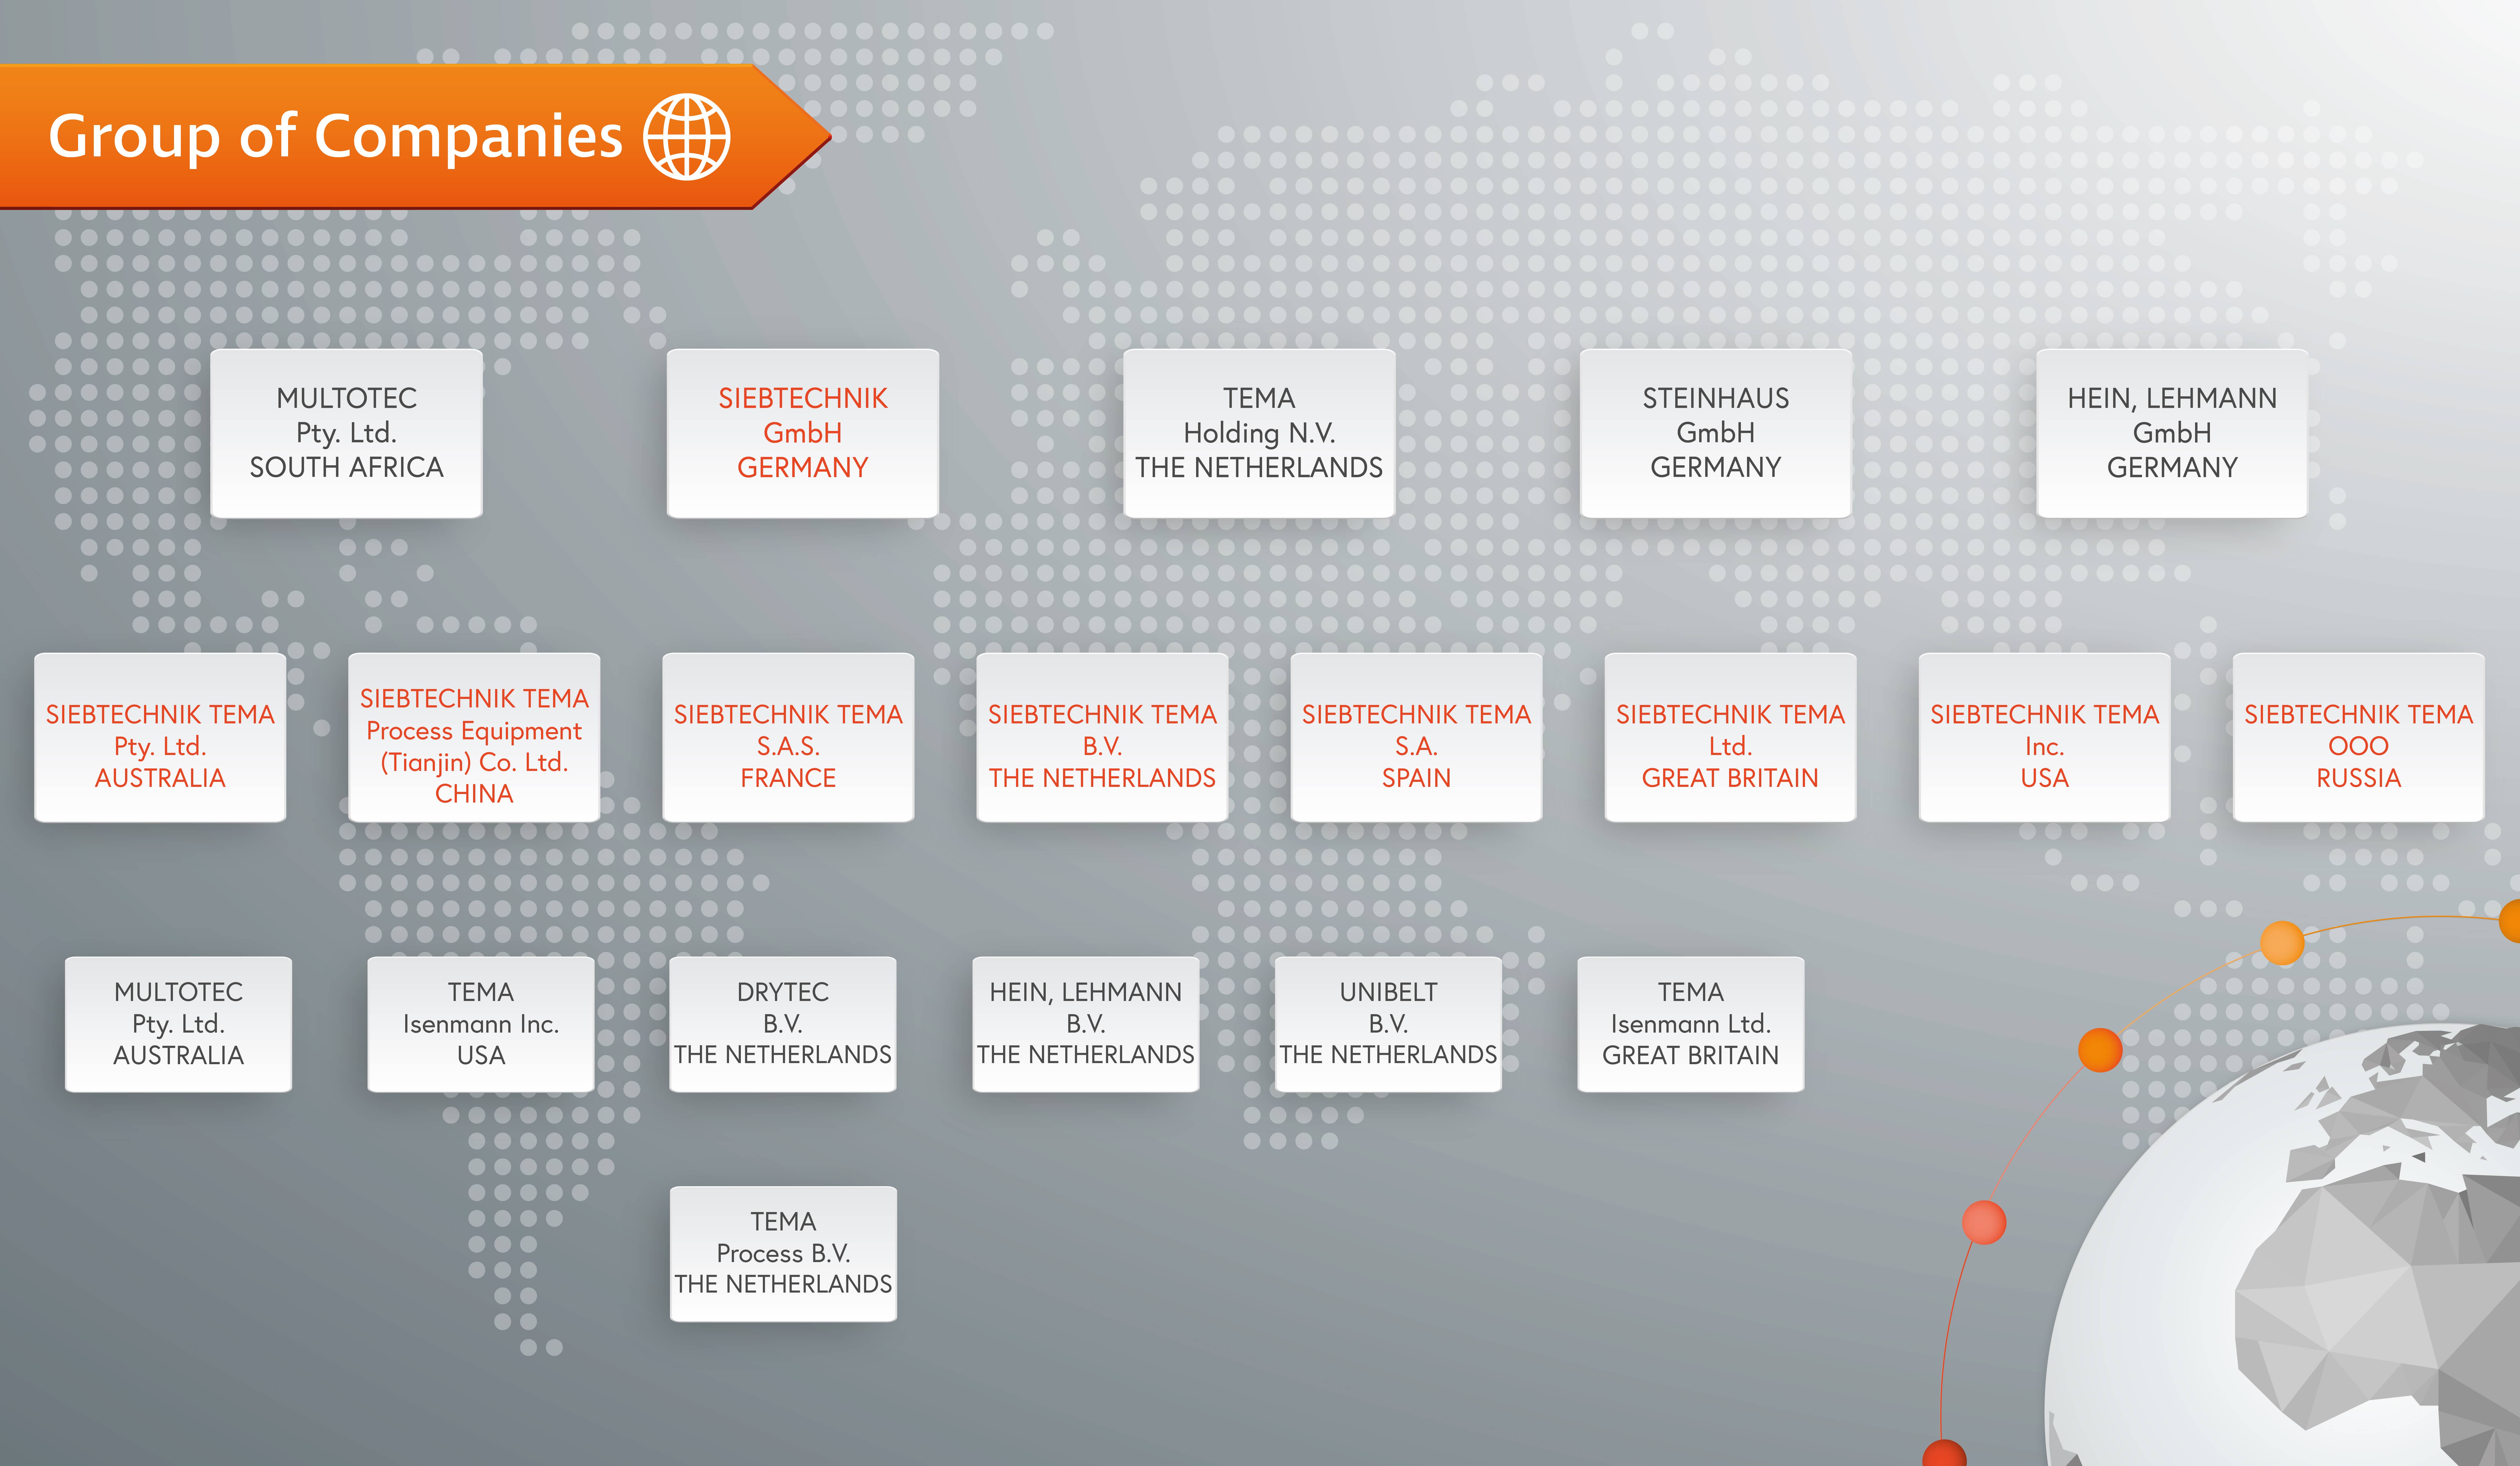 SIEBTECHNIK TEMA and excerpt of the global group of companies with names & locations